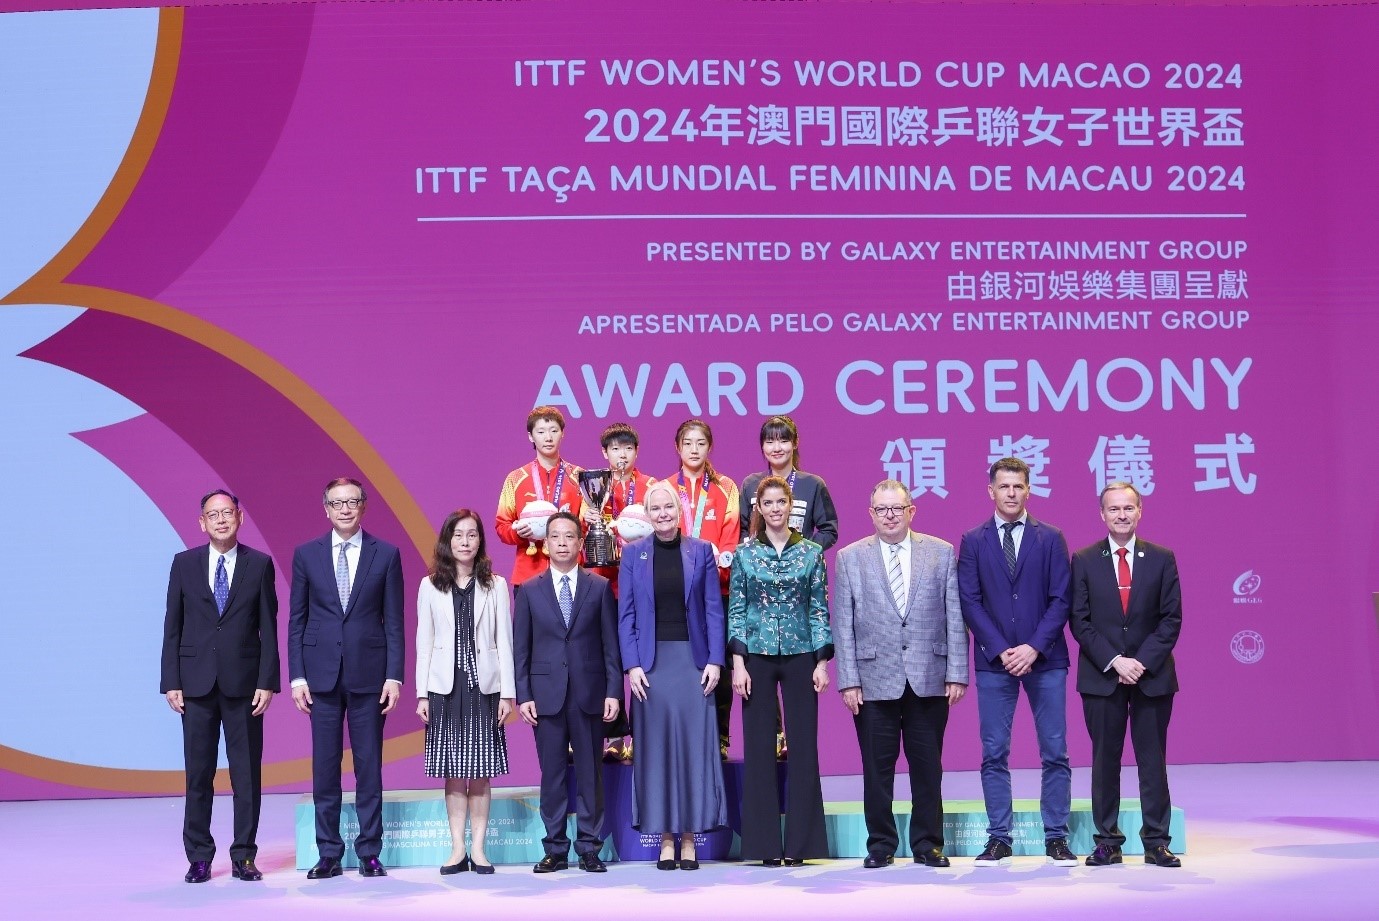 The officiating guests presented the awards to and took a photo with the ITTF Women’s World Cup champion, silver medalist and bronze medalist.